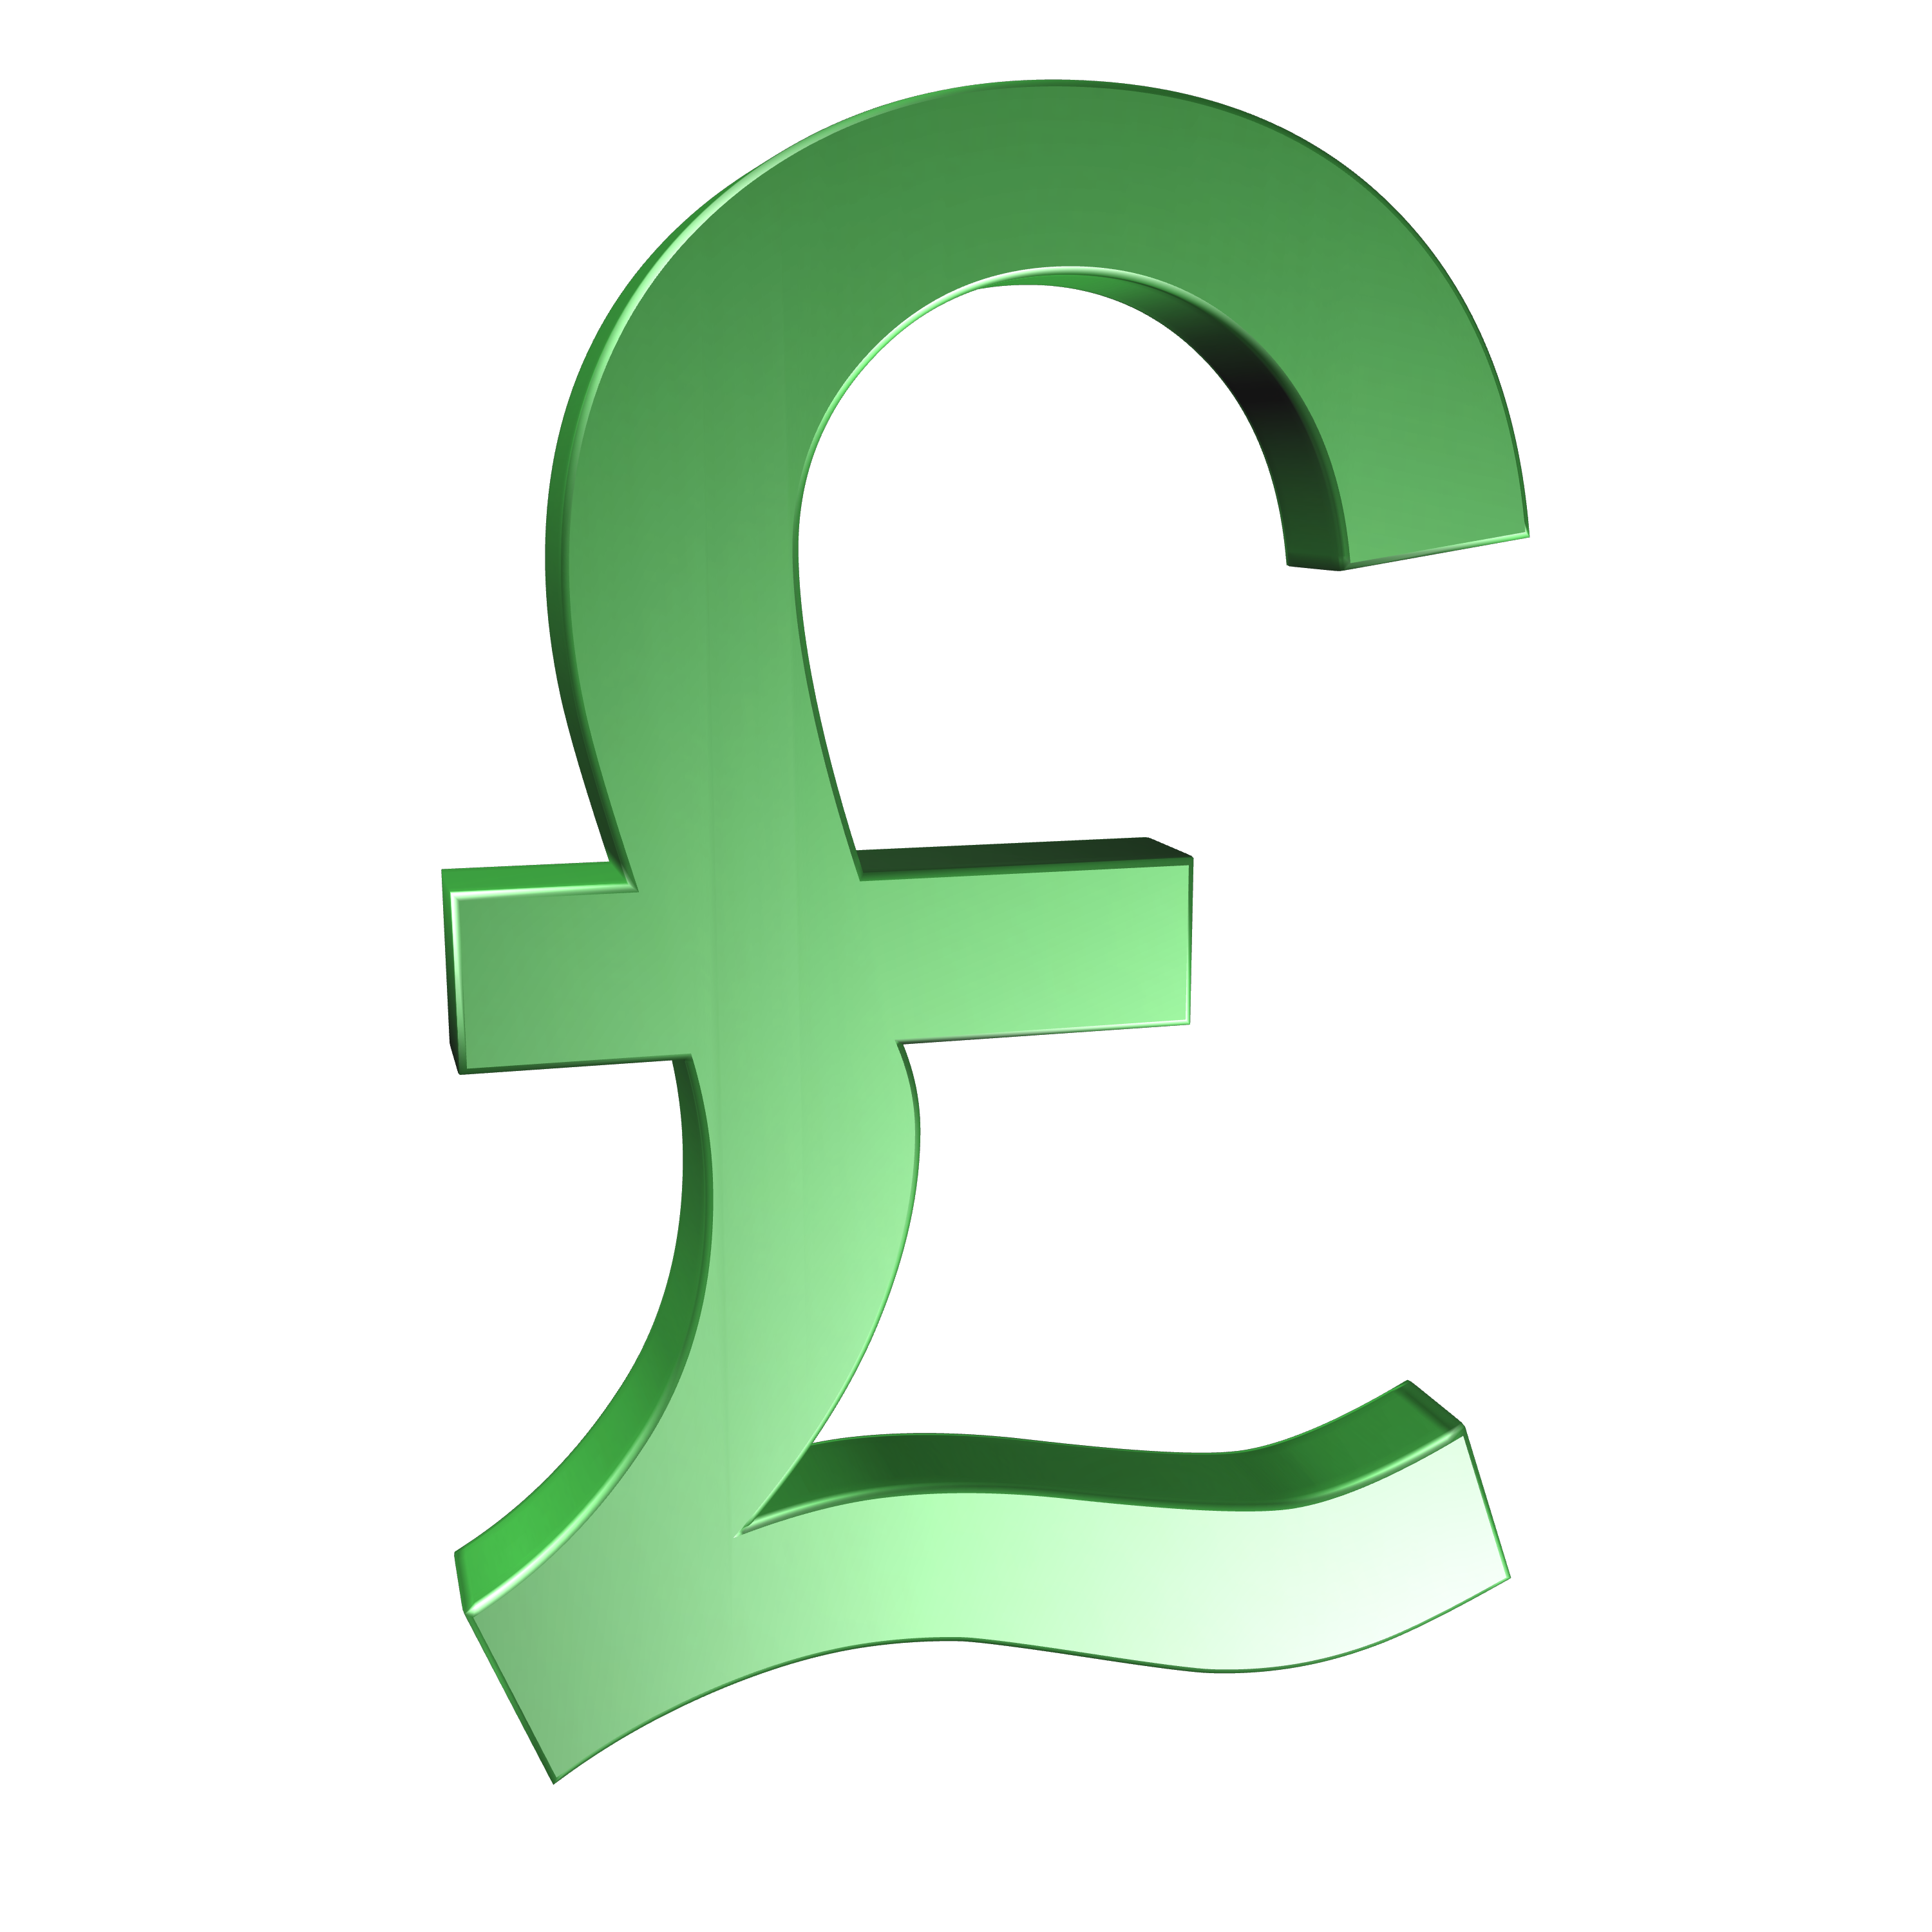 Pound Currency Drawing Free Image Download